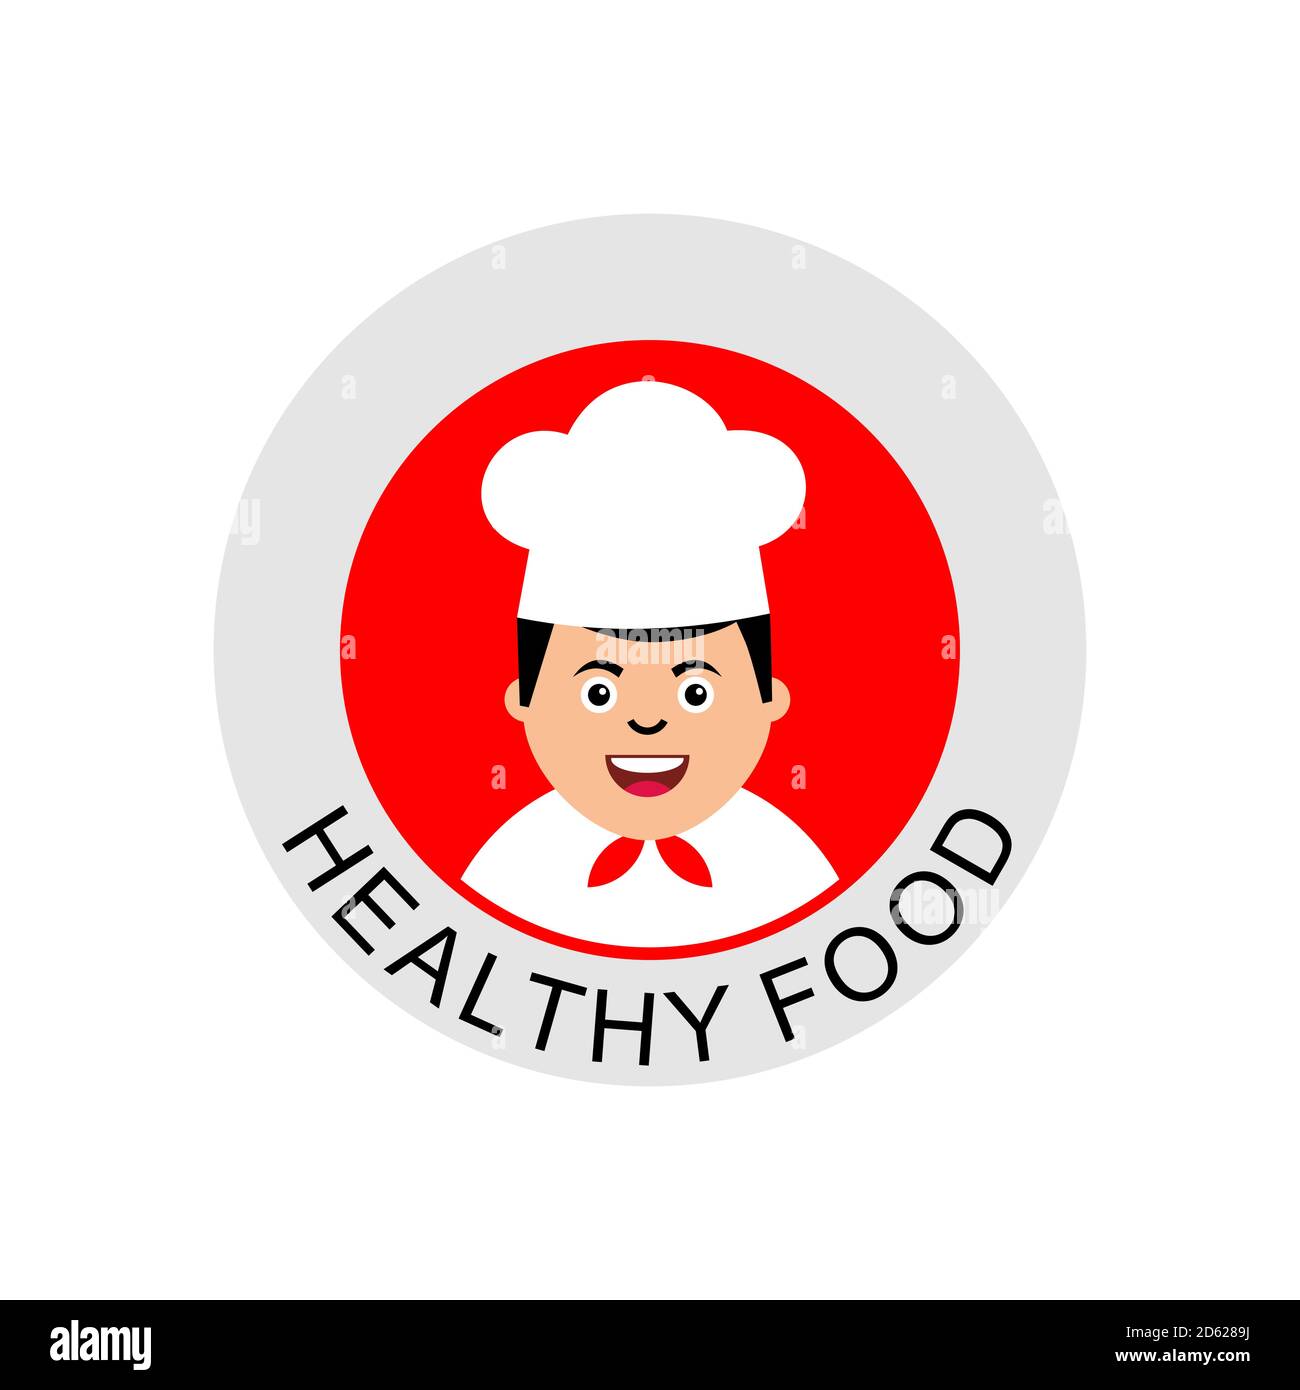 Chef Icon vector with healthy food text circle logo Stock Vector